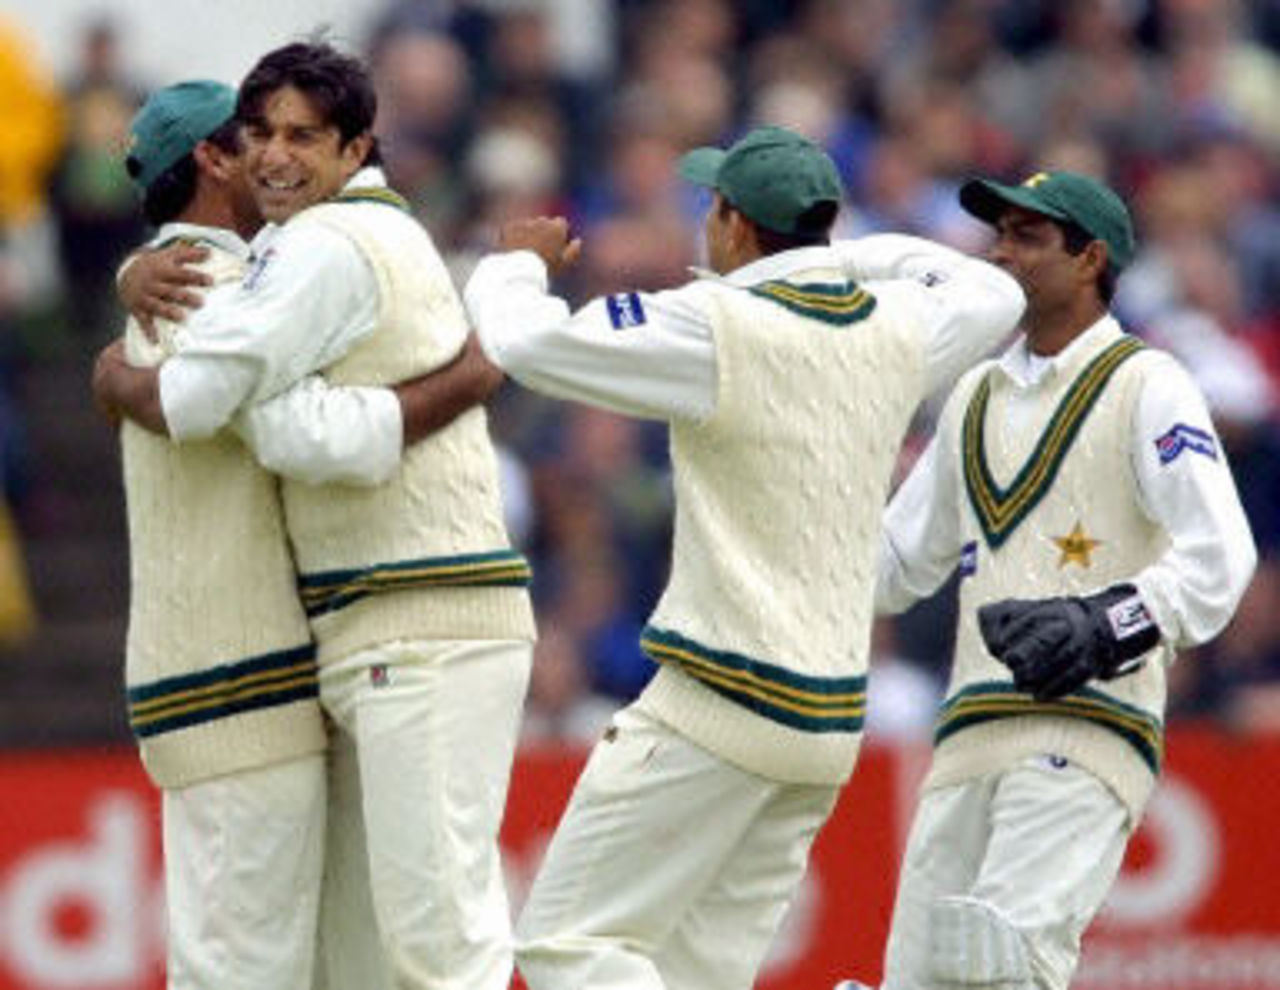 Wasim Akram and teammates celebrate, day 3, 2nd Test at Old Trafford, 17-21 May 2001.